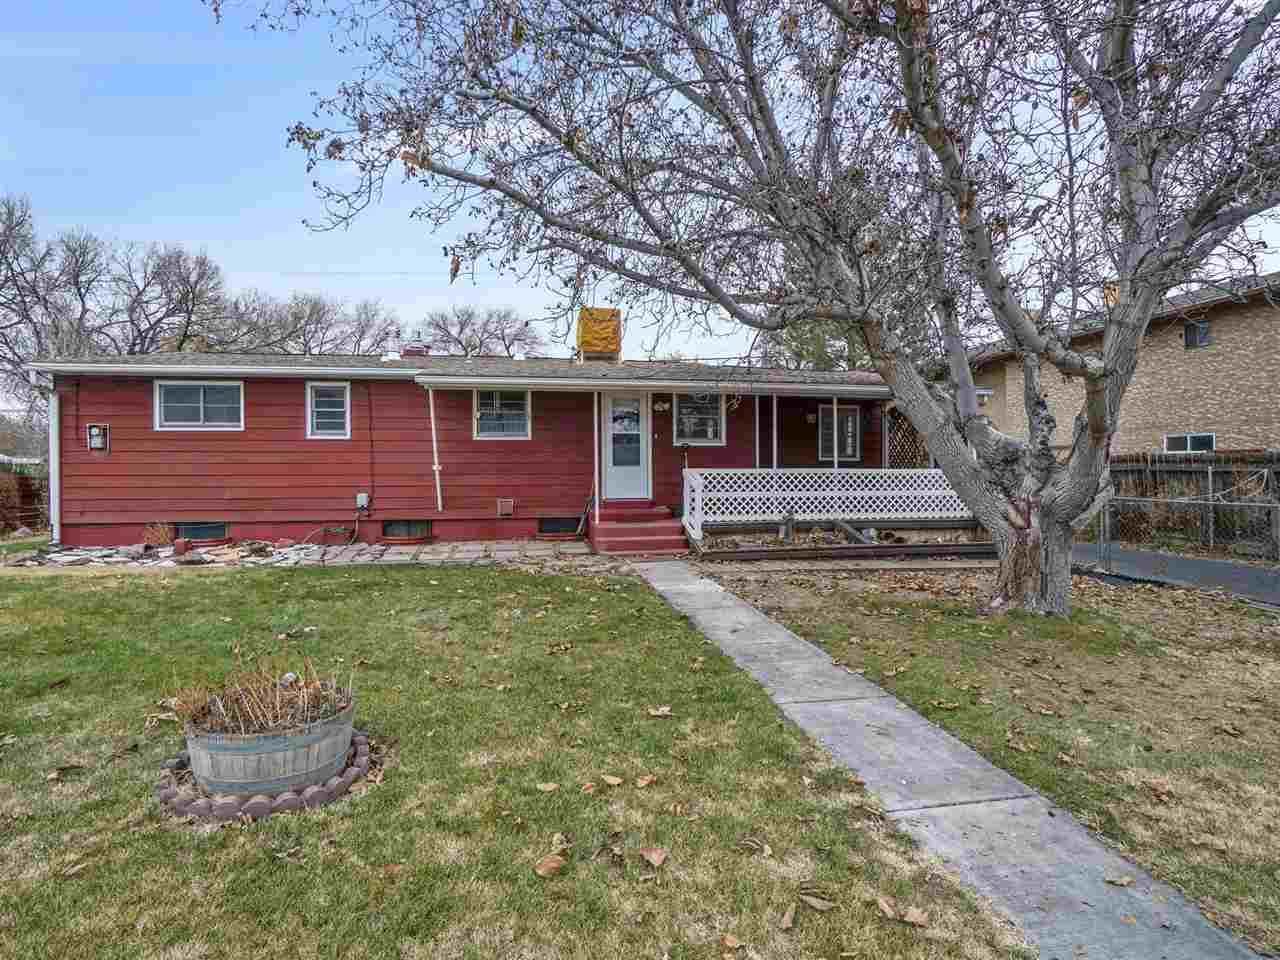 519 28 1/2 Road, Grand Junction, CO 81501